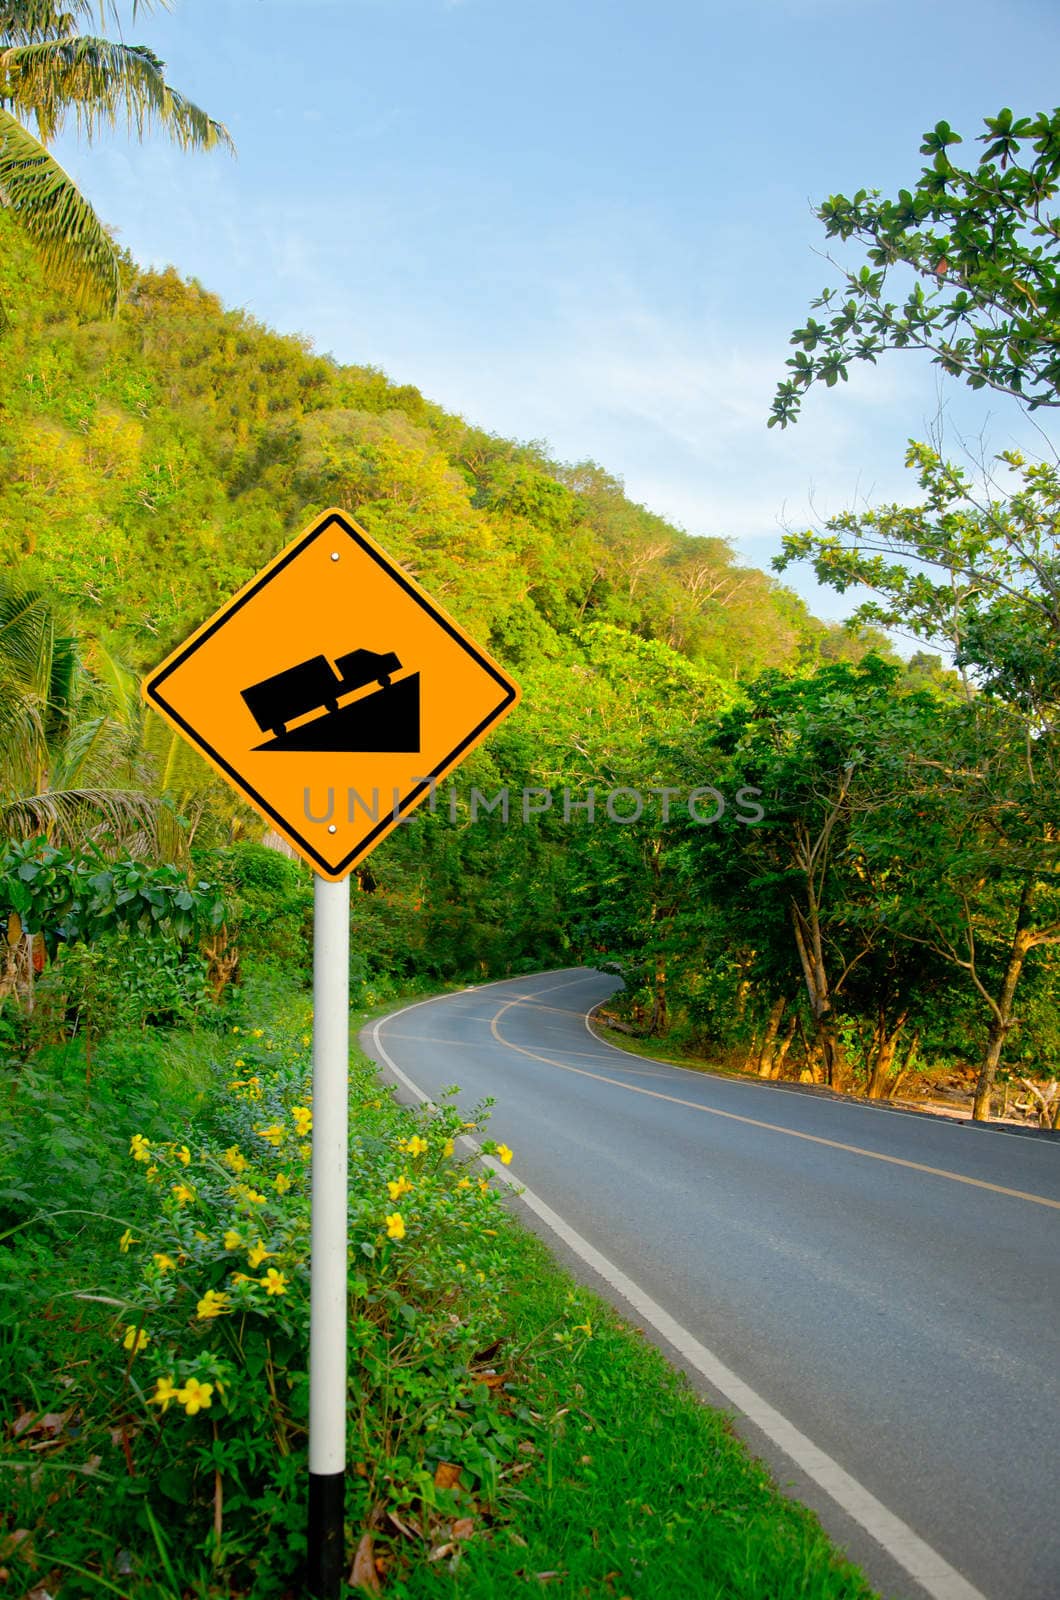 Steep grade hill traffic sign on road by Gamjai